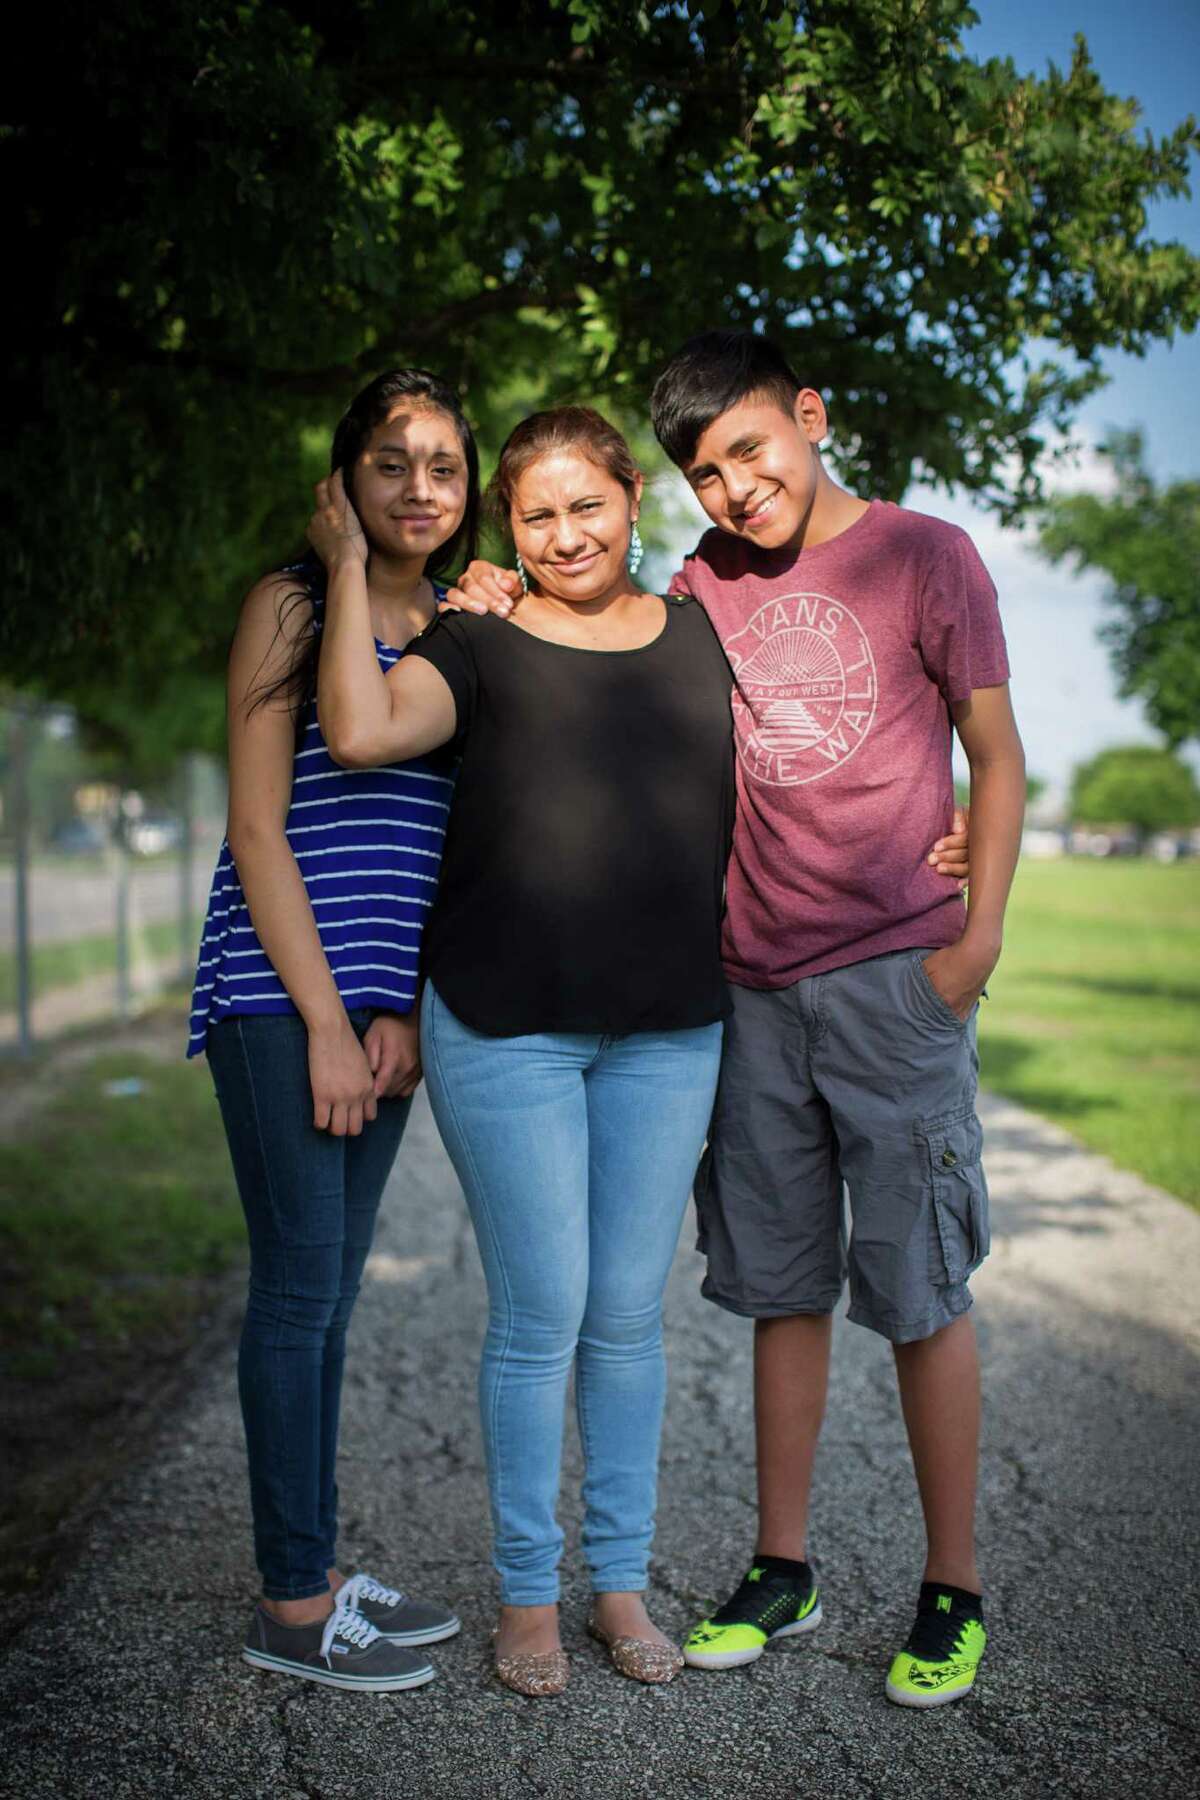 Patricia Salazar, center, 40, and her children Maykol Salazar, right, 14, and Linneth Salazar, 13, left, sit in the park near their home in Houston. Patricia Salazar came to the United States from Honduras eight years ago and sent for her children last year. Patricia Salazar works two jobs to be able to bring them and sustain them. Maykol is one of the top ESL students in his class and making all As at Lee High School despite only starting to learn English this year. Tuesday, May 19, 2015, in Houston.